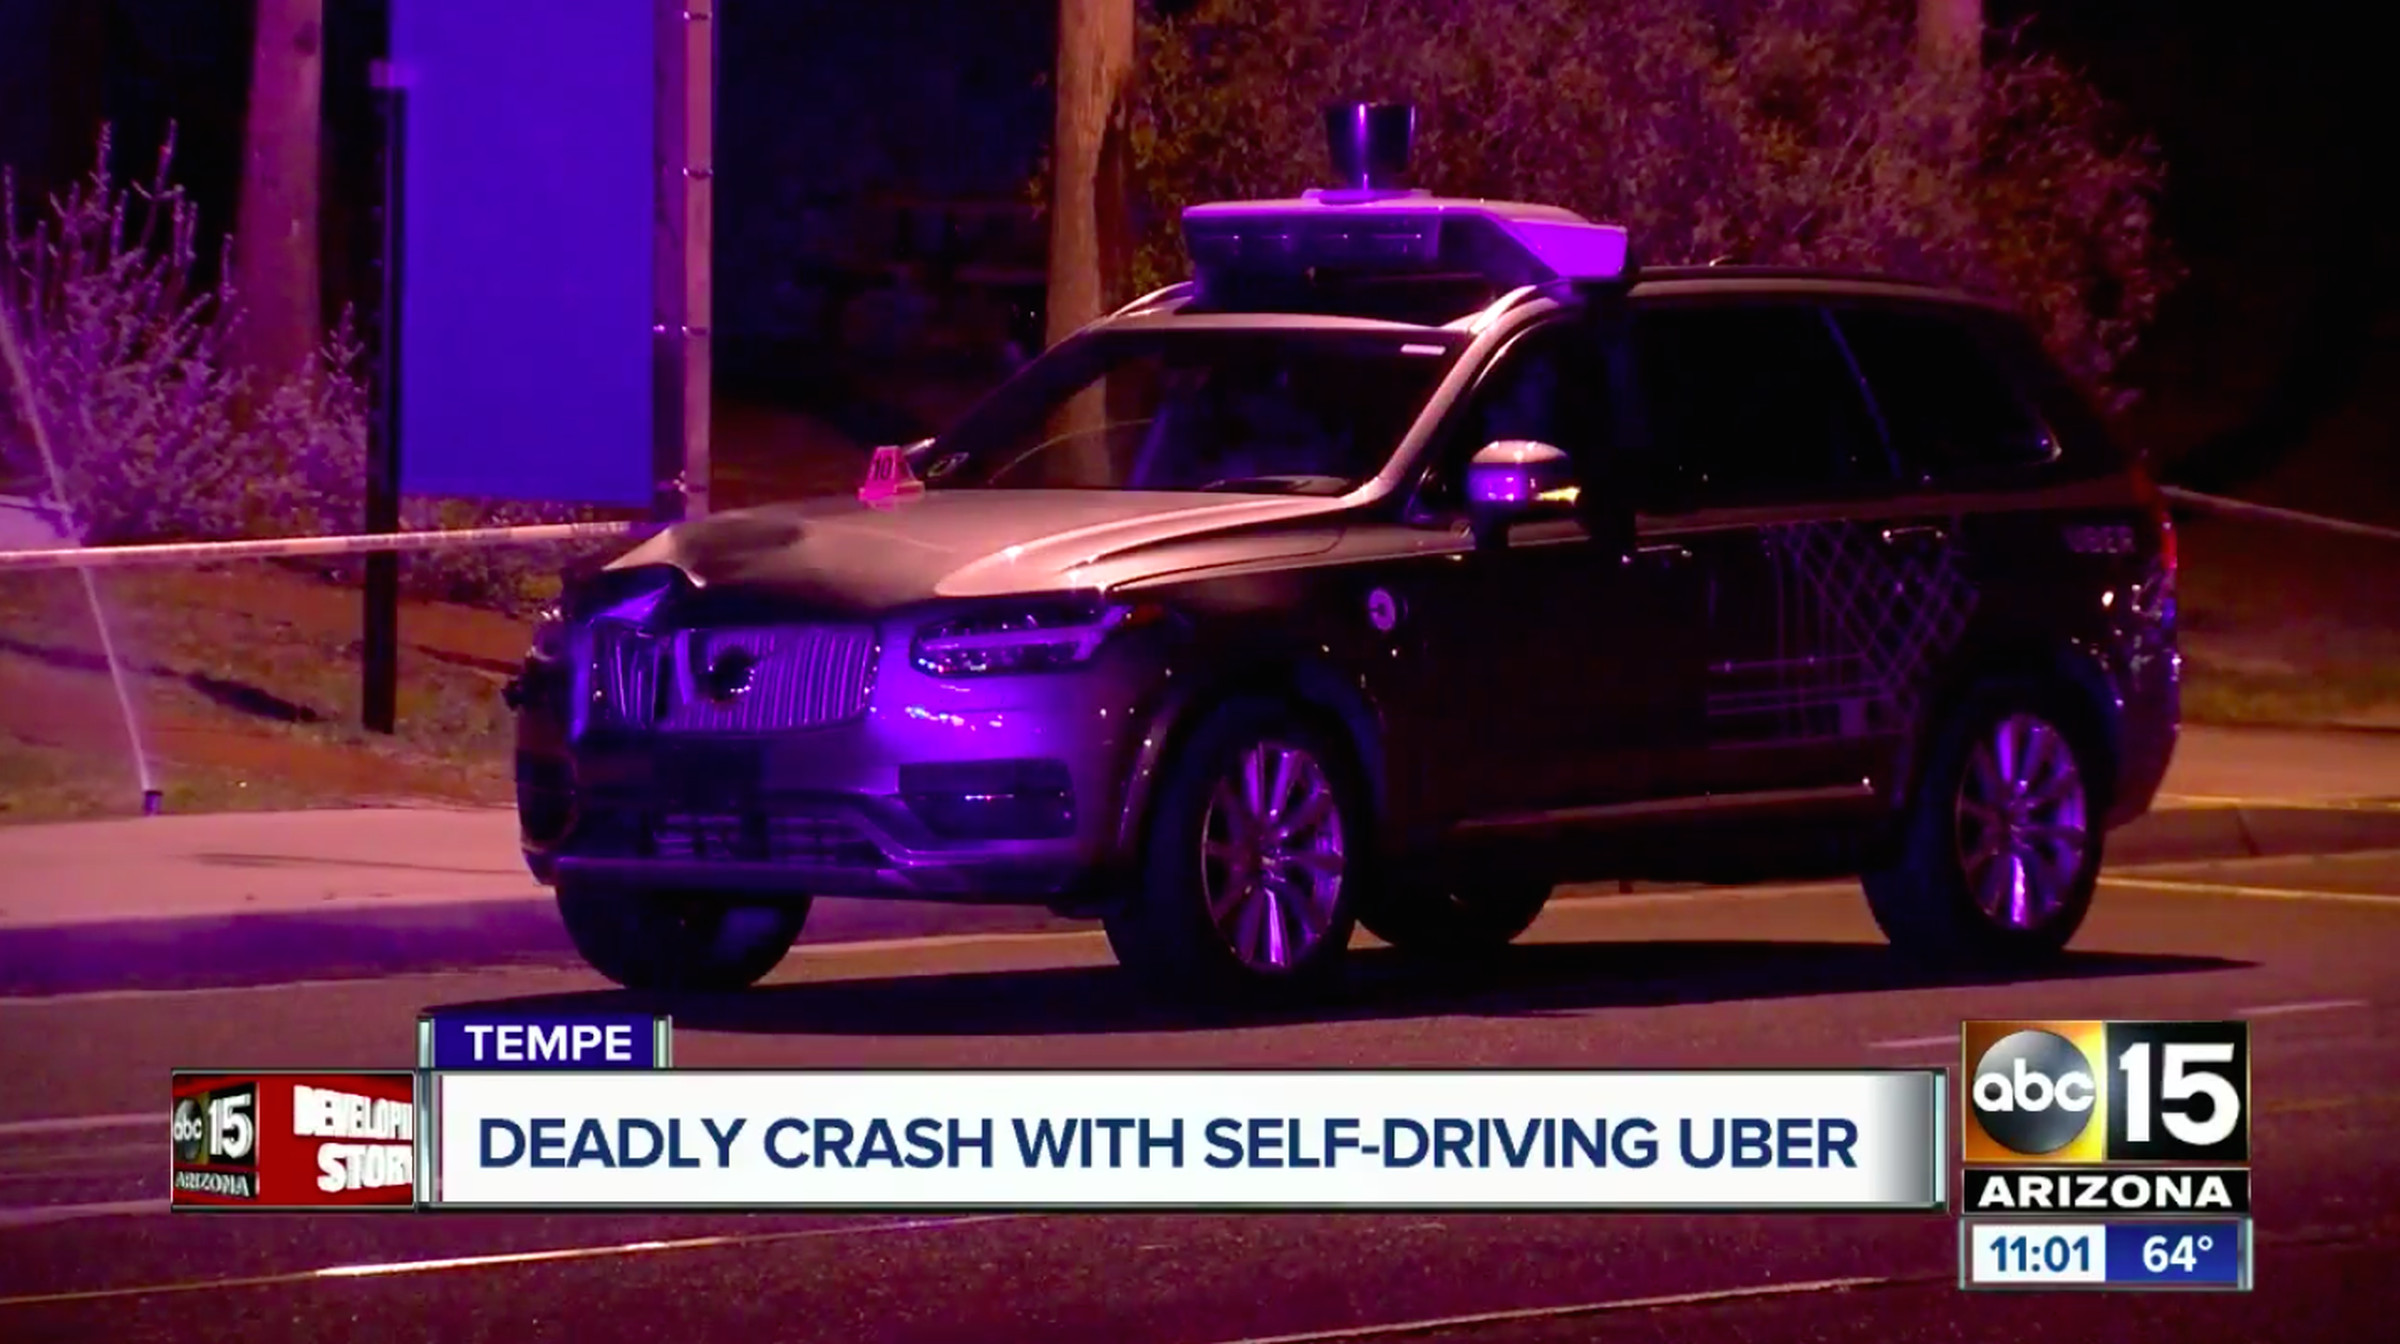 The self-driving Uber vehicle involved in a fatal crash in Tempe, Arizona.